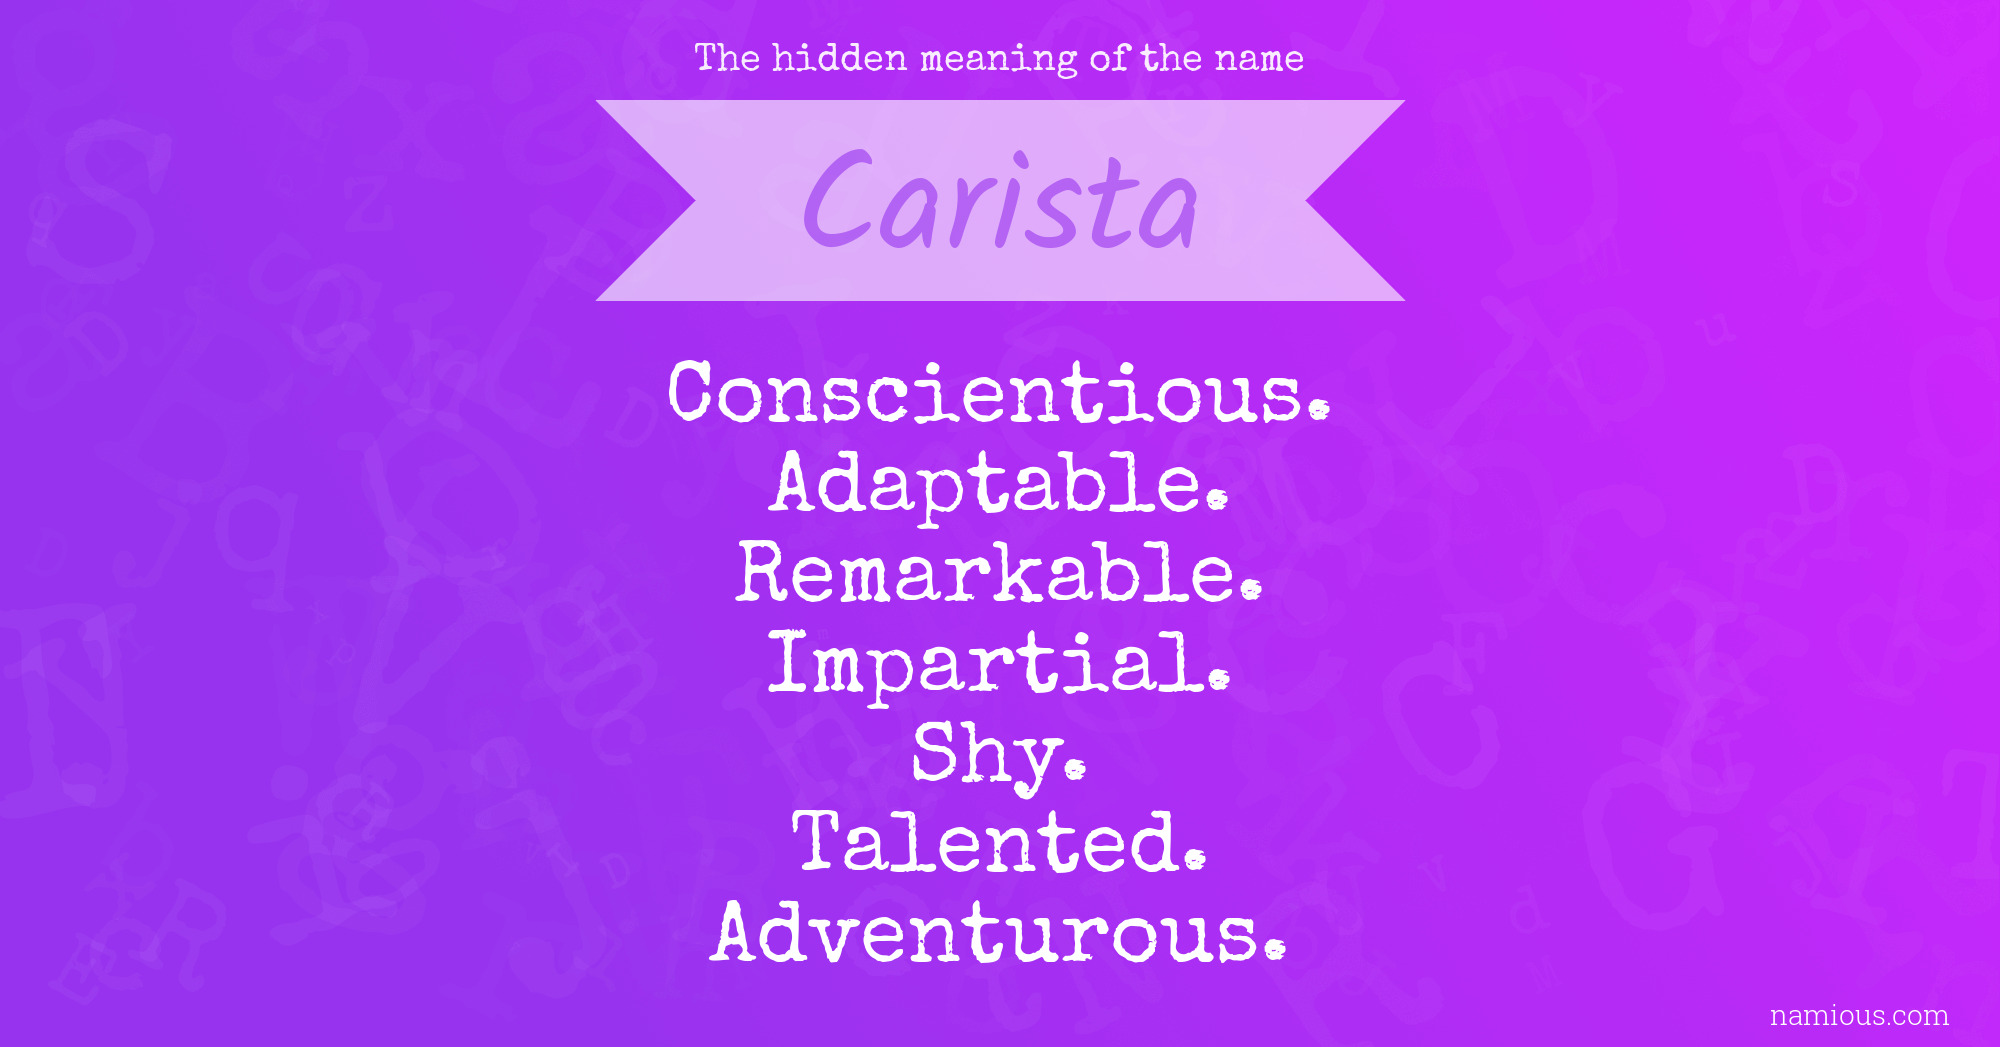 The hidden meaning of the name Carista